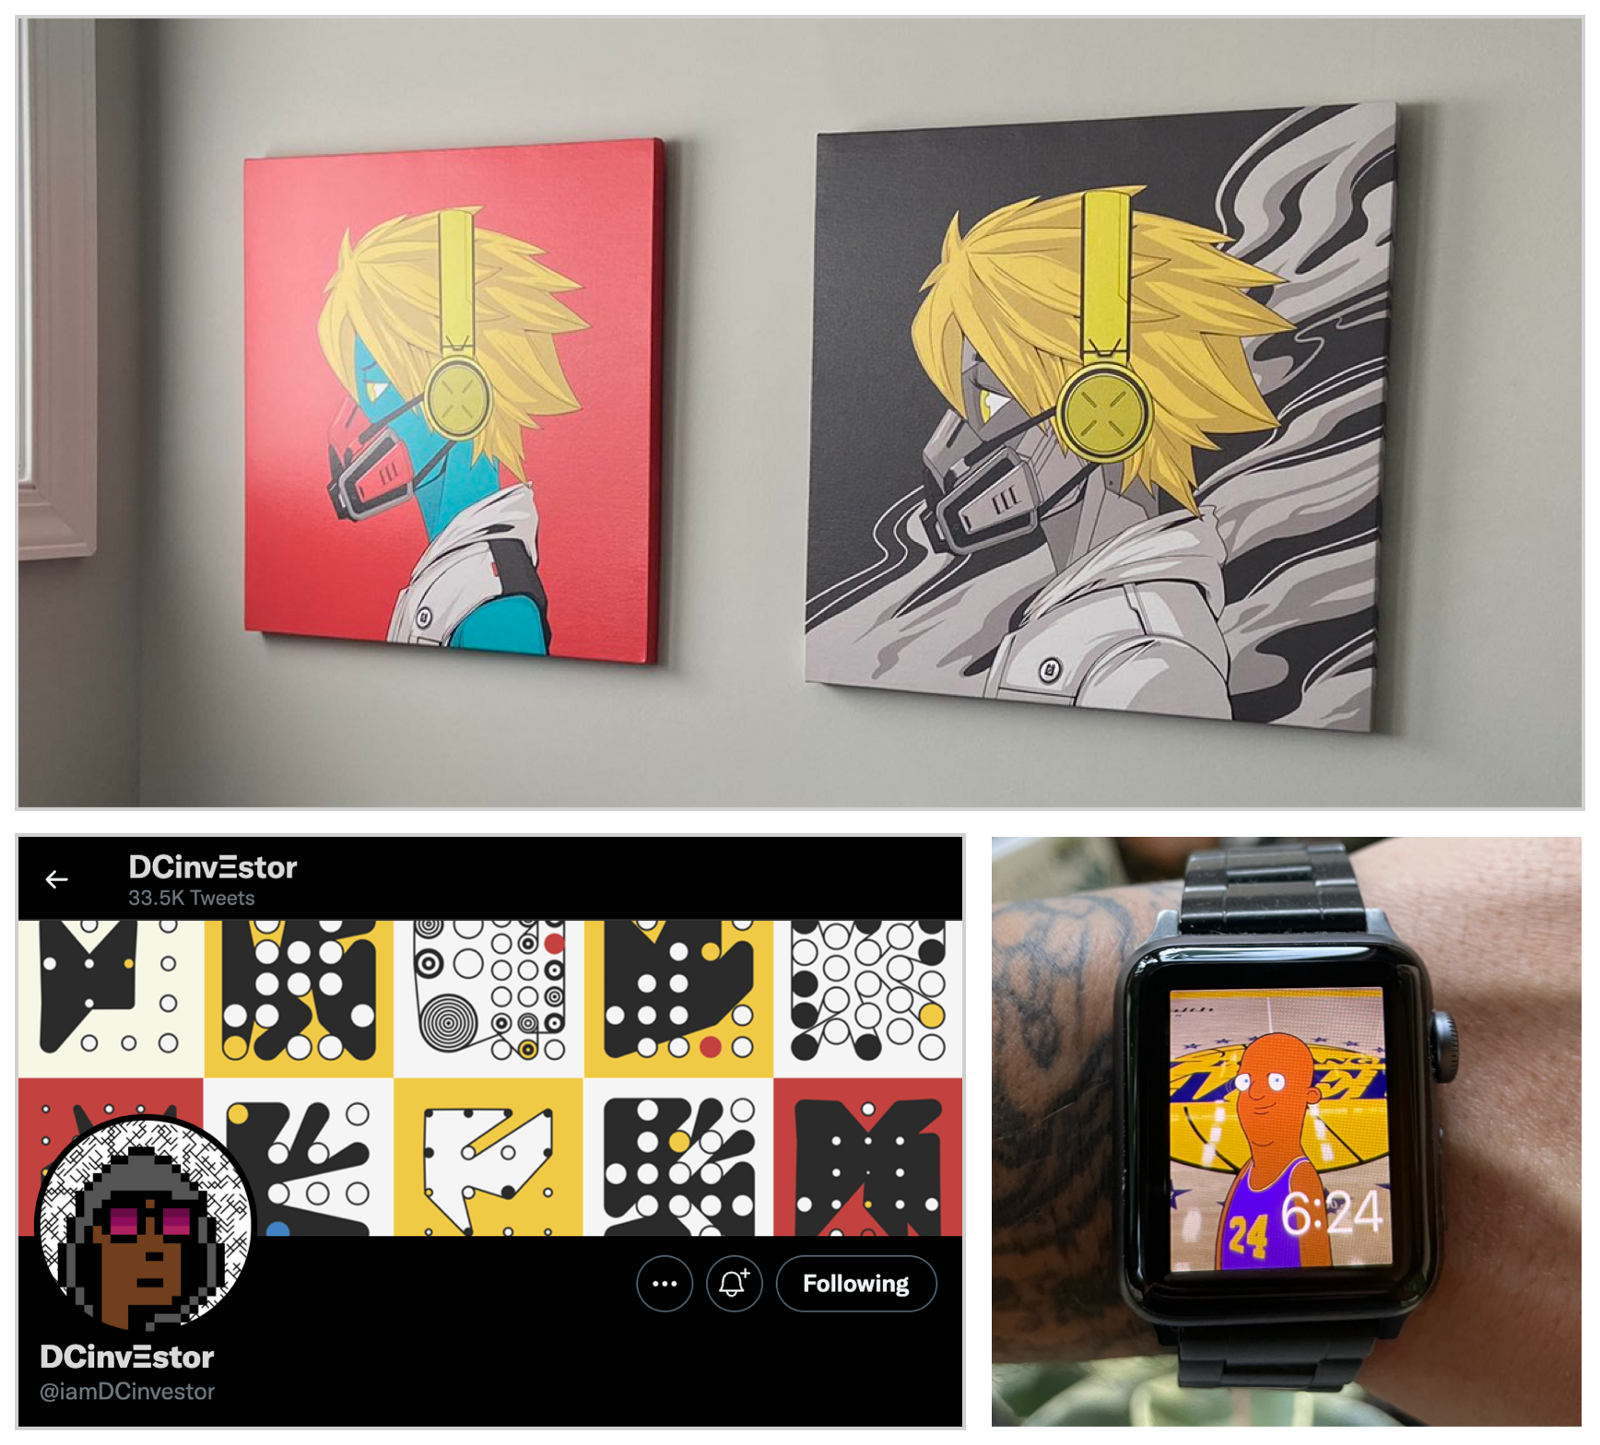 2 printed NFT avatars on a wall, a Twitter profile with an NFT avatar profile picture, and a smartwatch with an NFT as the background.